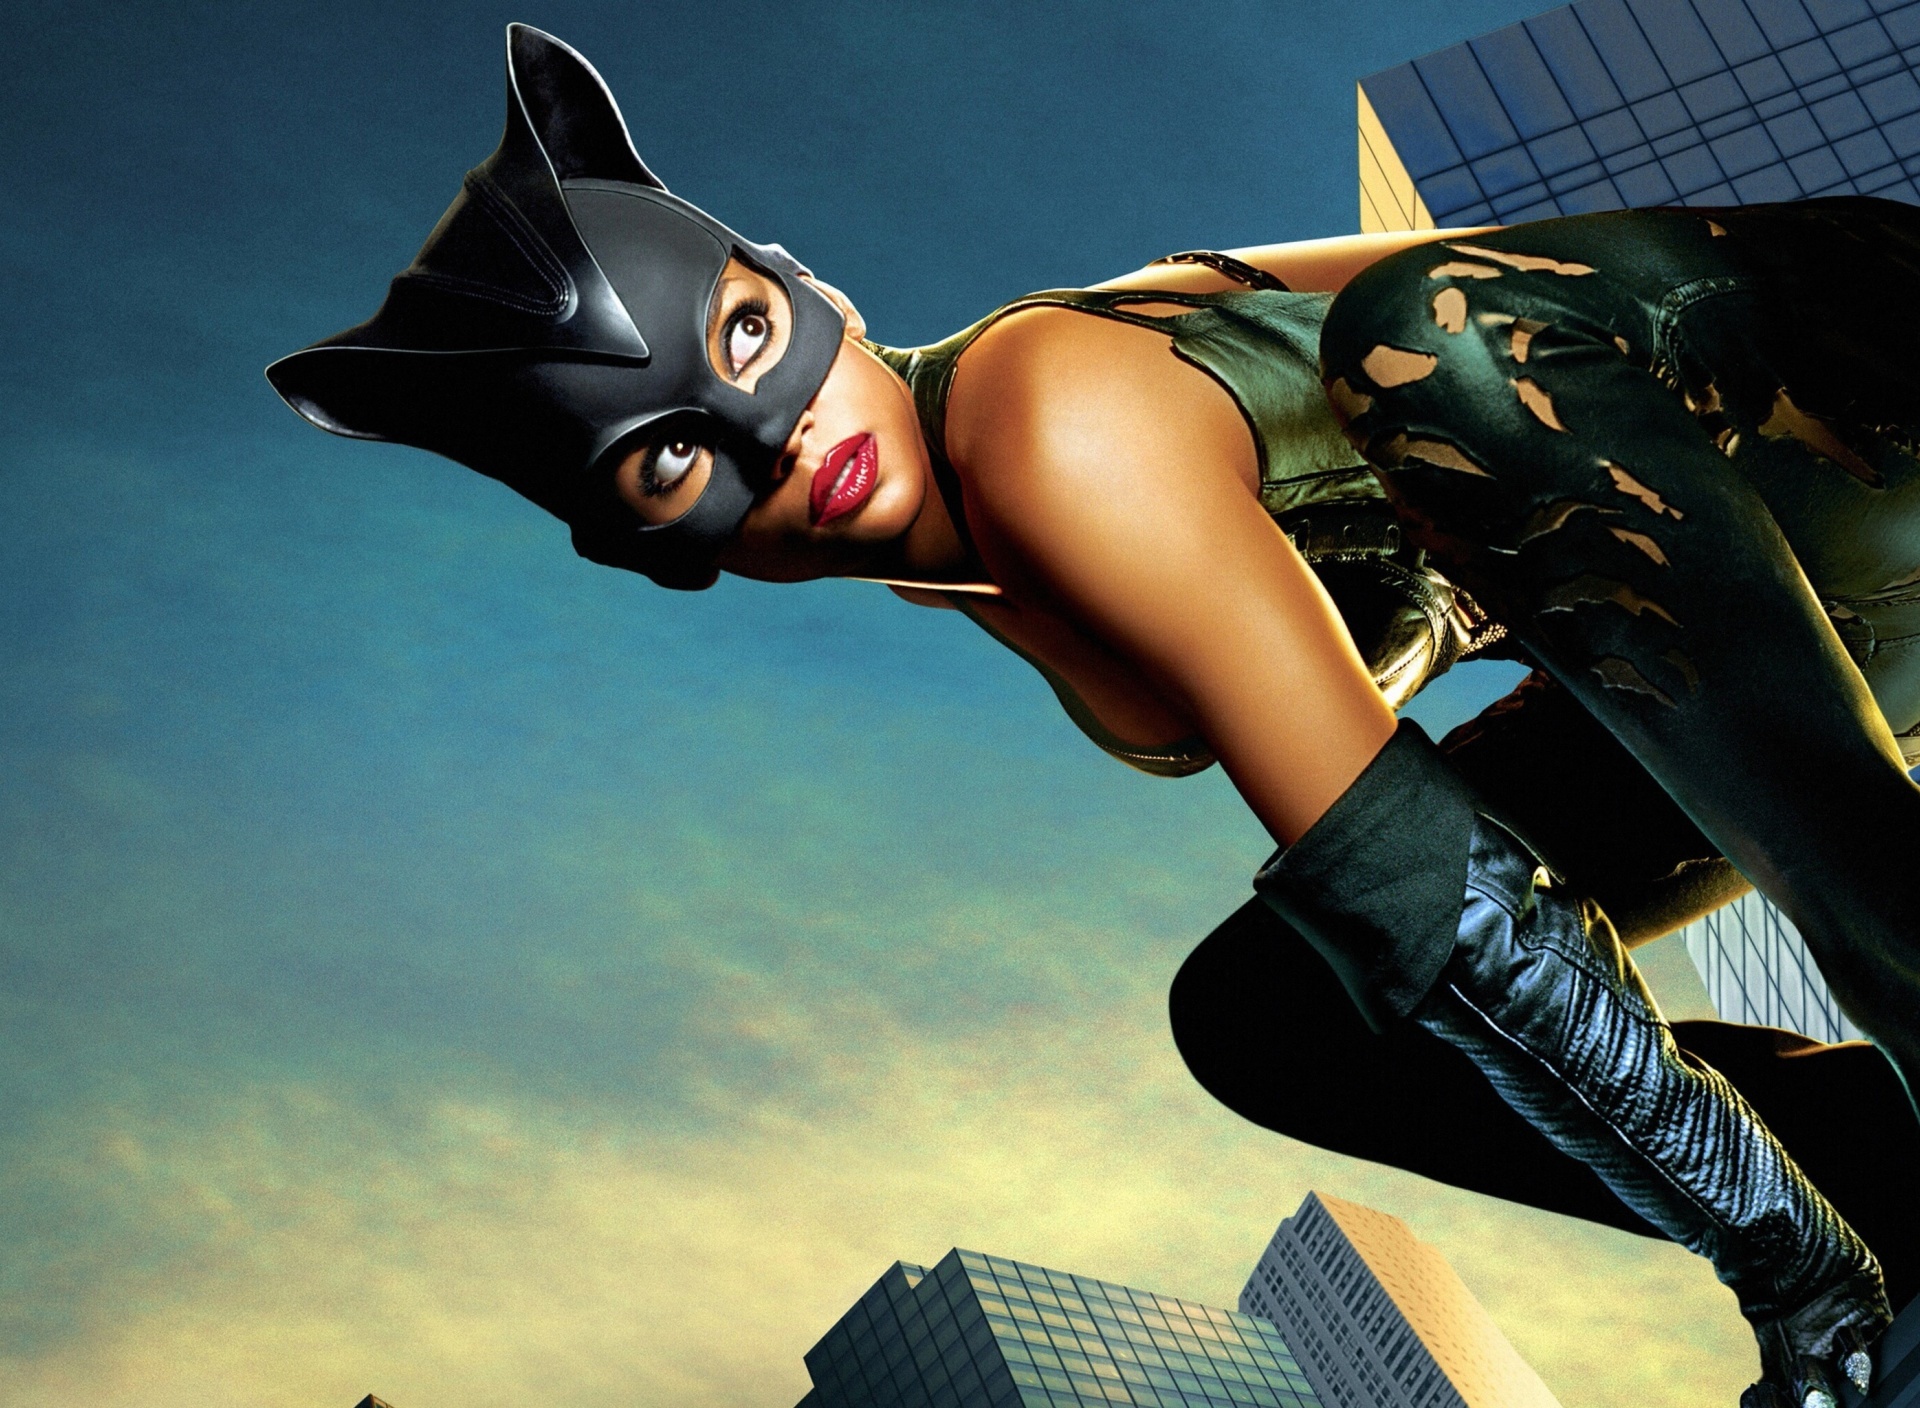 Catwoman (Halle Berry), Stunning wallpapers, Halle Berry tribute, Huawei Mate 9, 1920x1410 HD Desktop